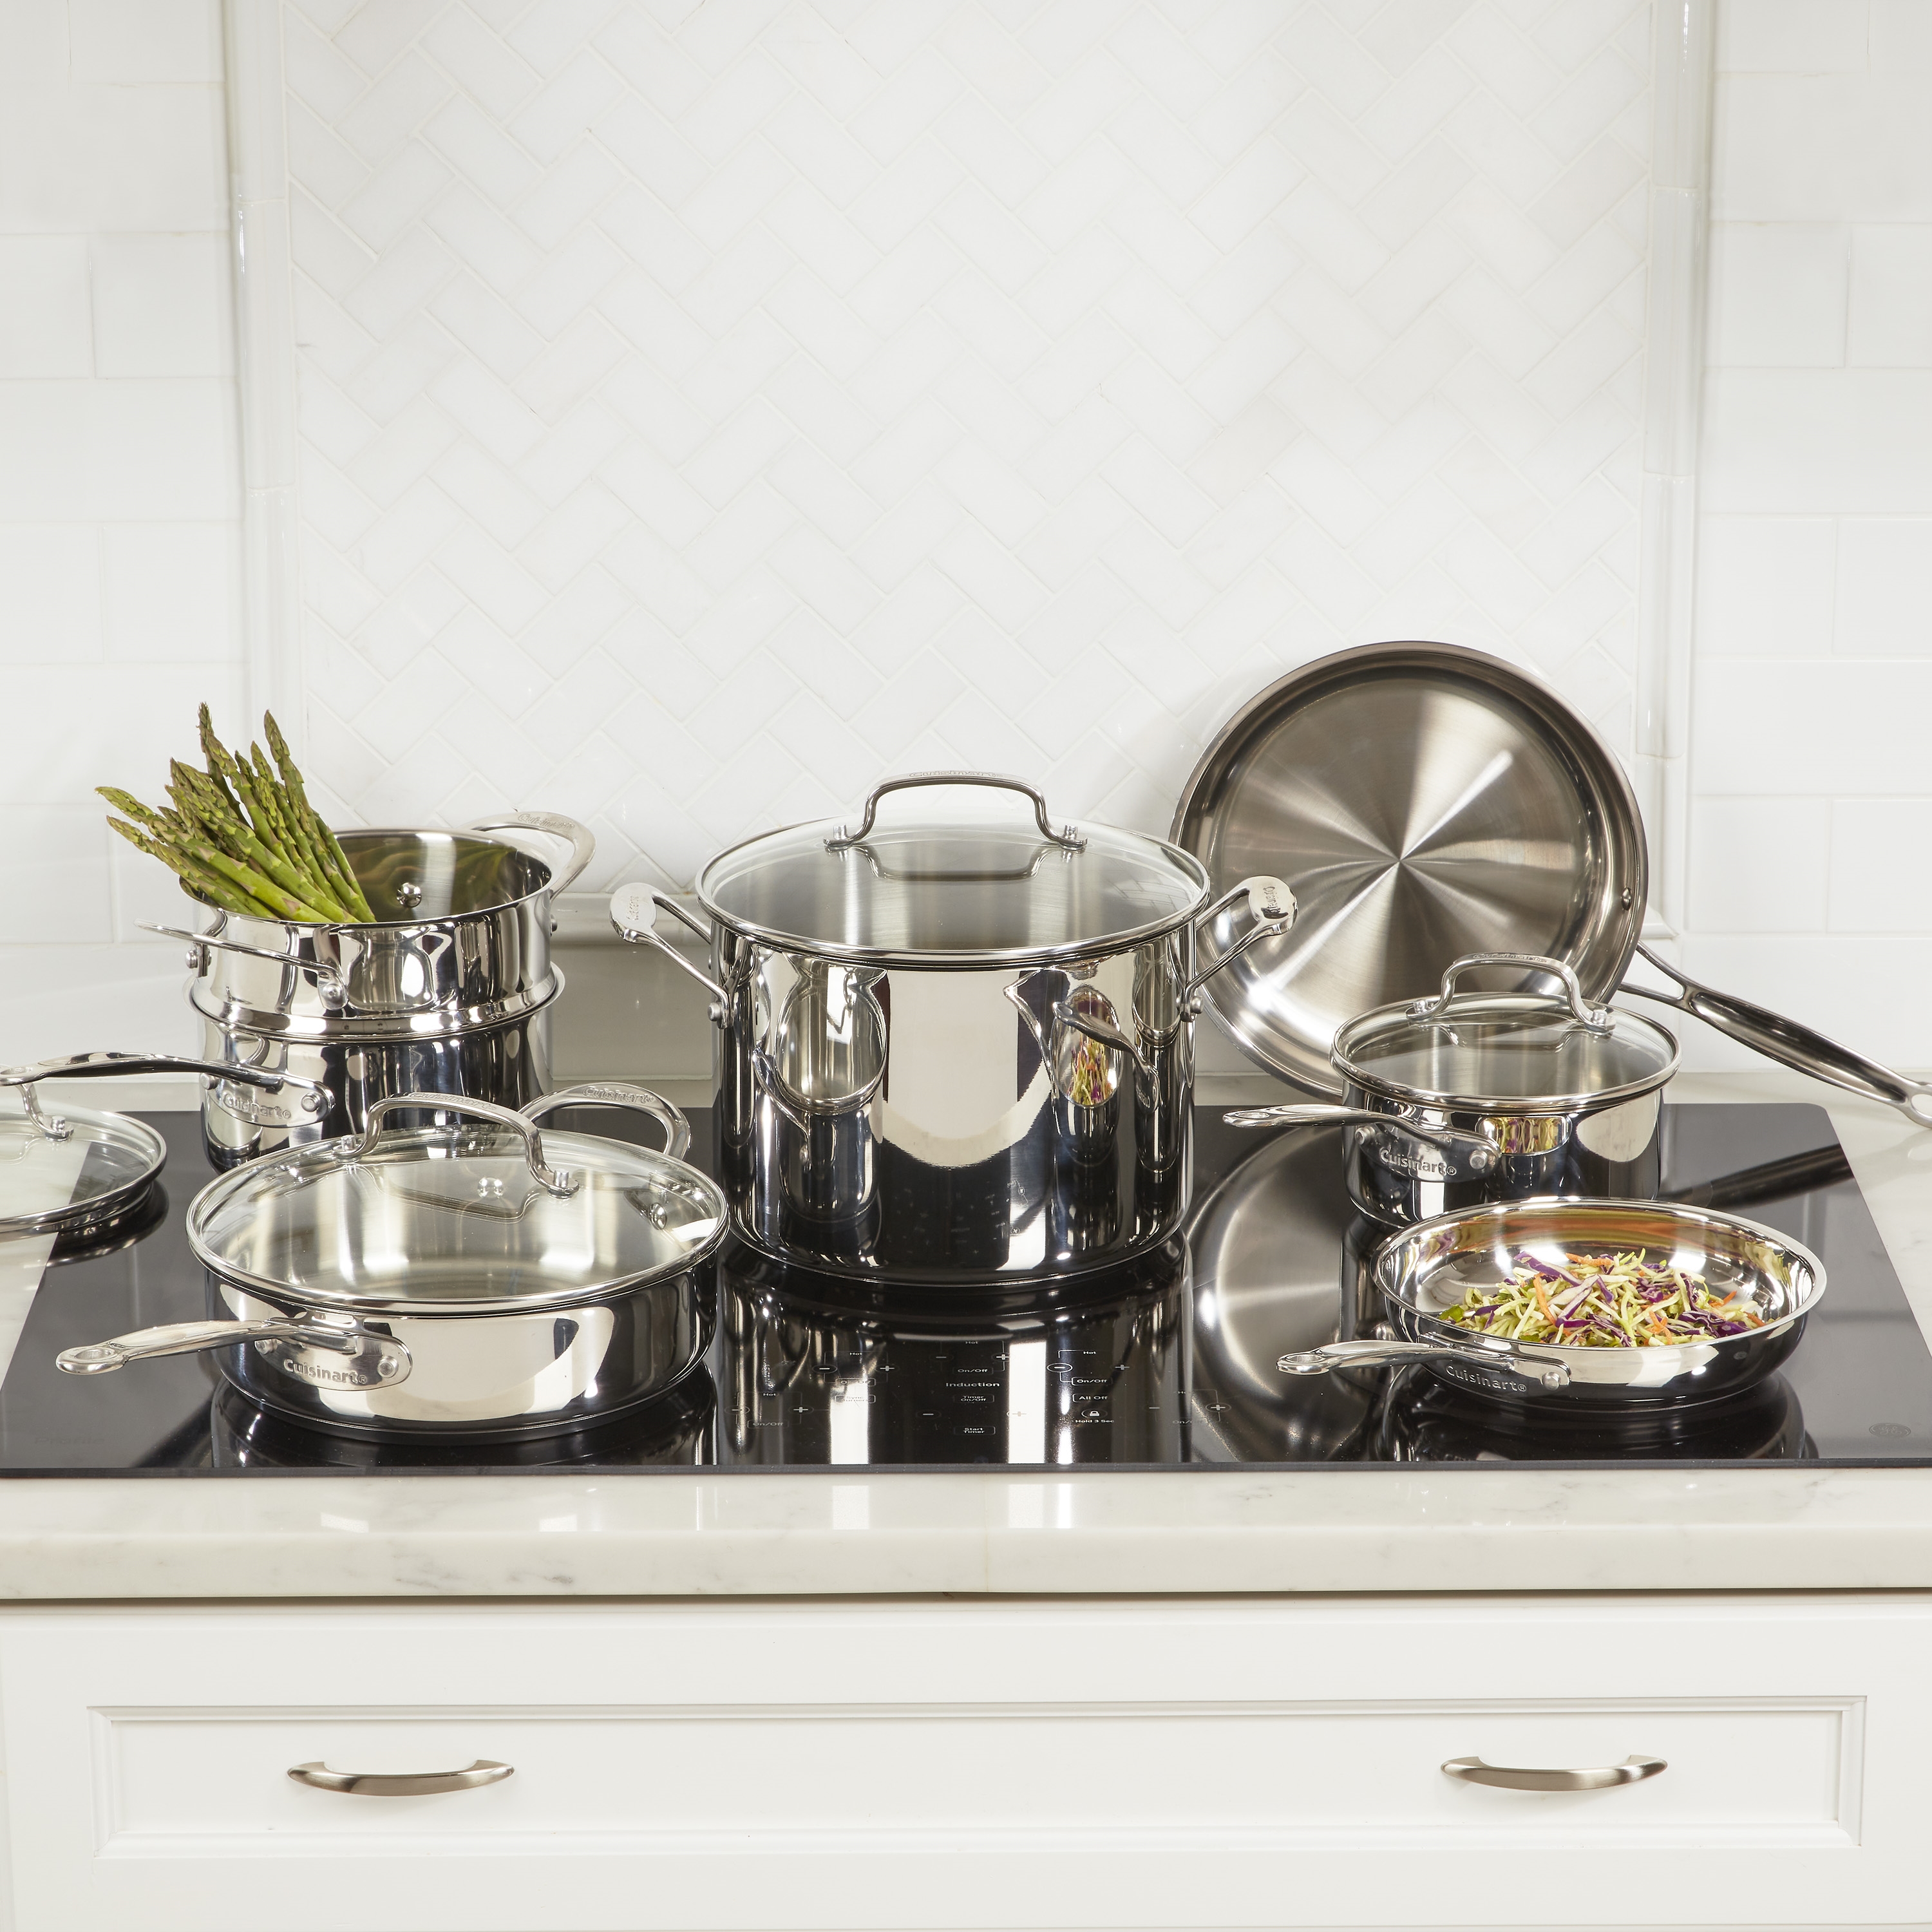 A Cuisinart stainless steel cookware set displayed on a marble countertop against a white herringbone tile backsplash. The set includes various pots and pans with reflective surfaces and lids. One pot holds fresh asparagus, and a small pan contains colorful vegetable stir-fry, highlighting the cookware's functionality and elegant design in a stylish kitchen setting.